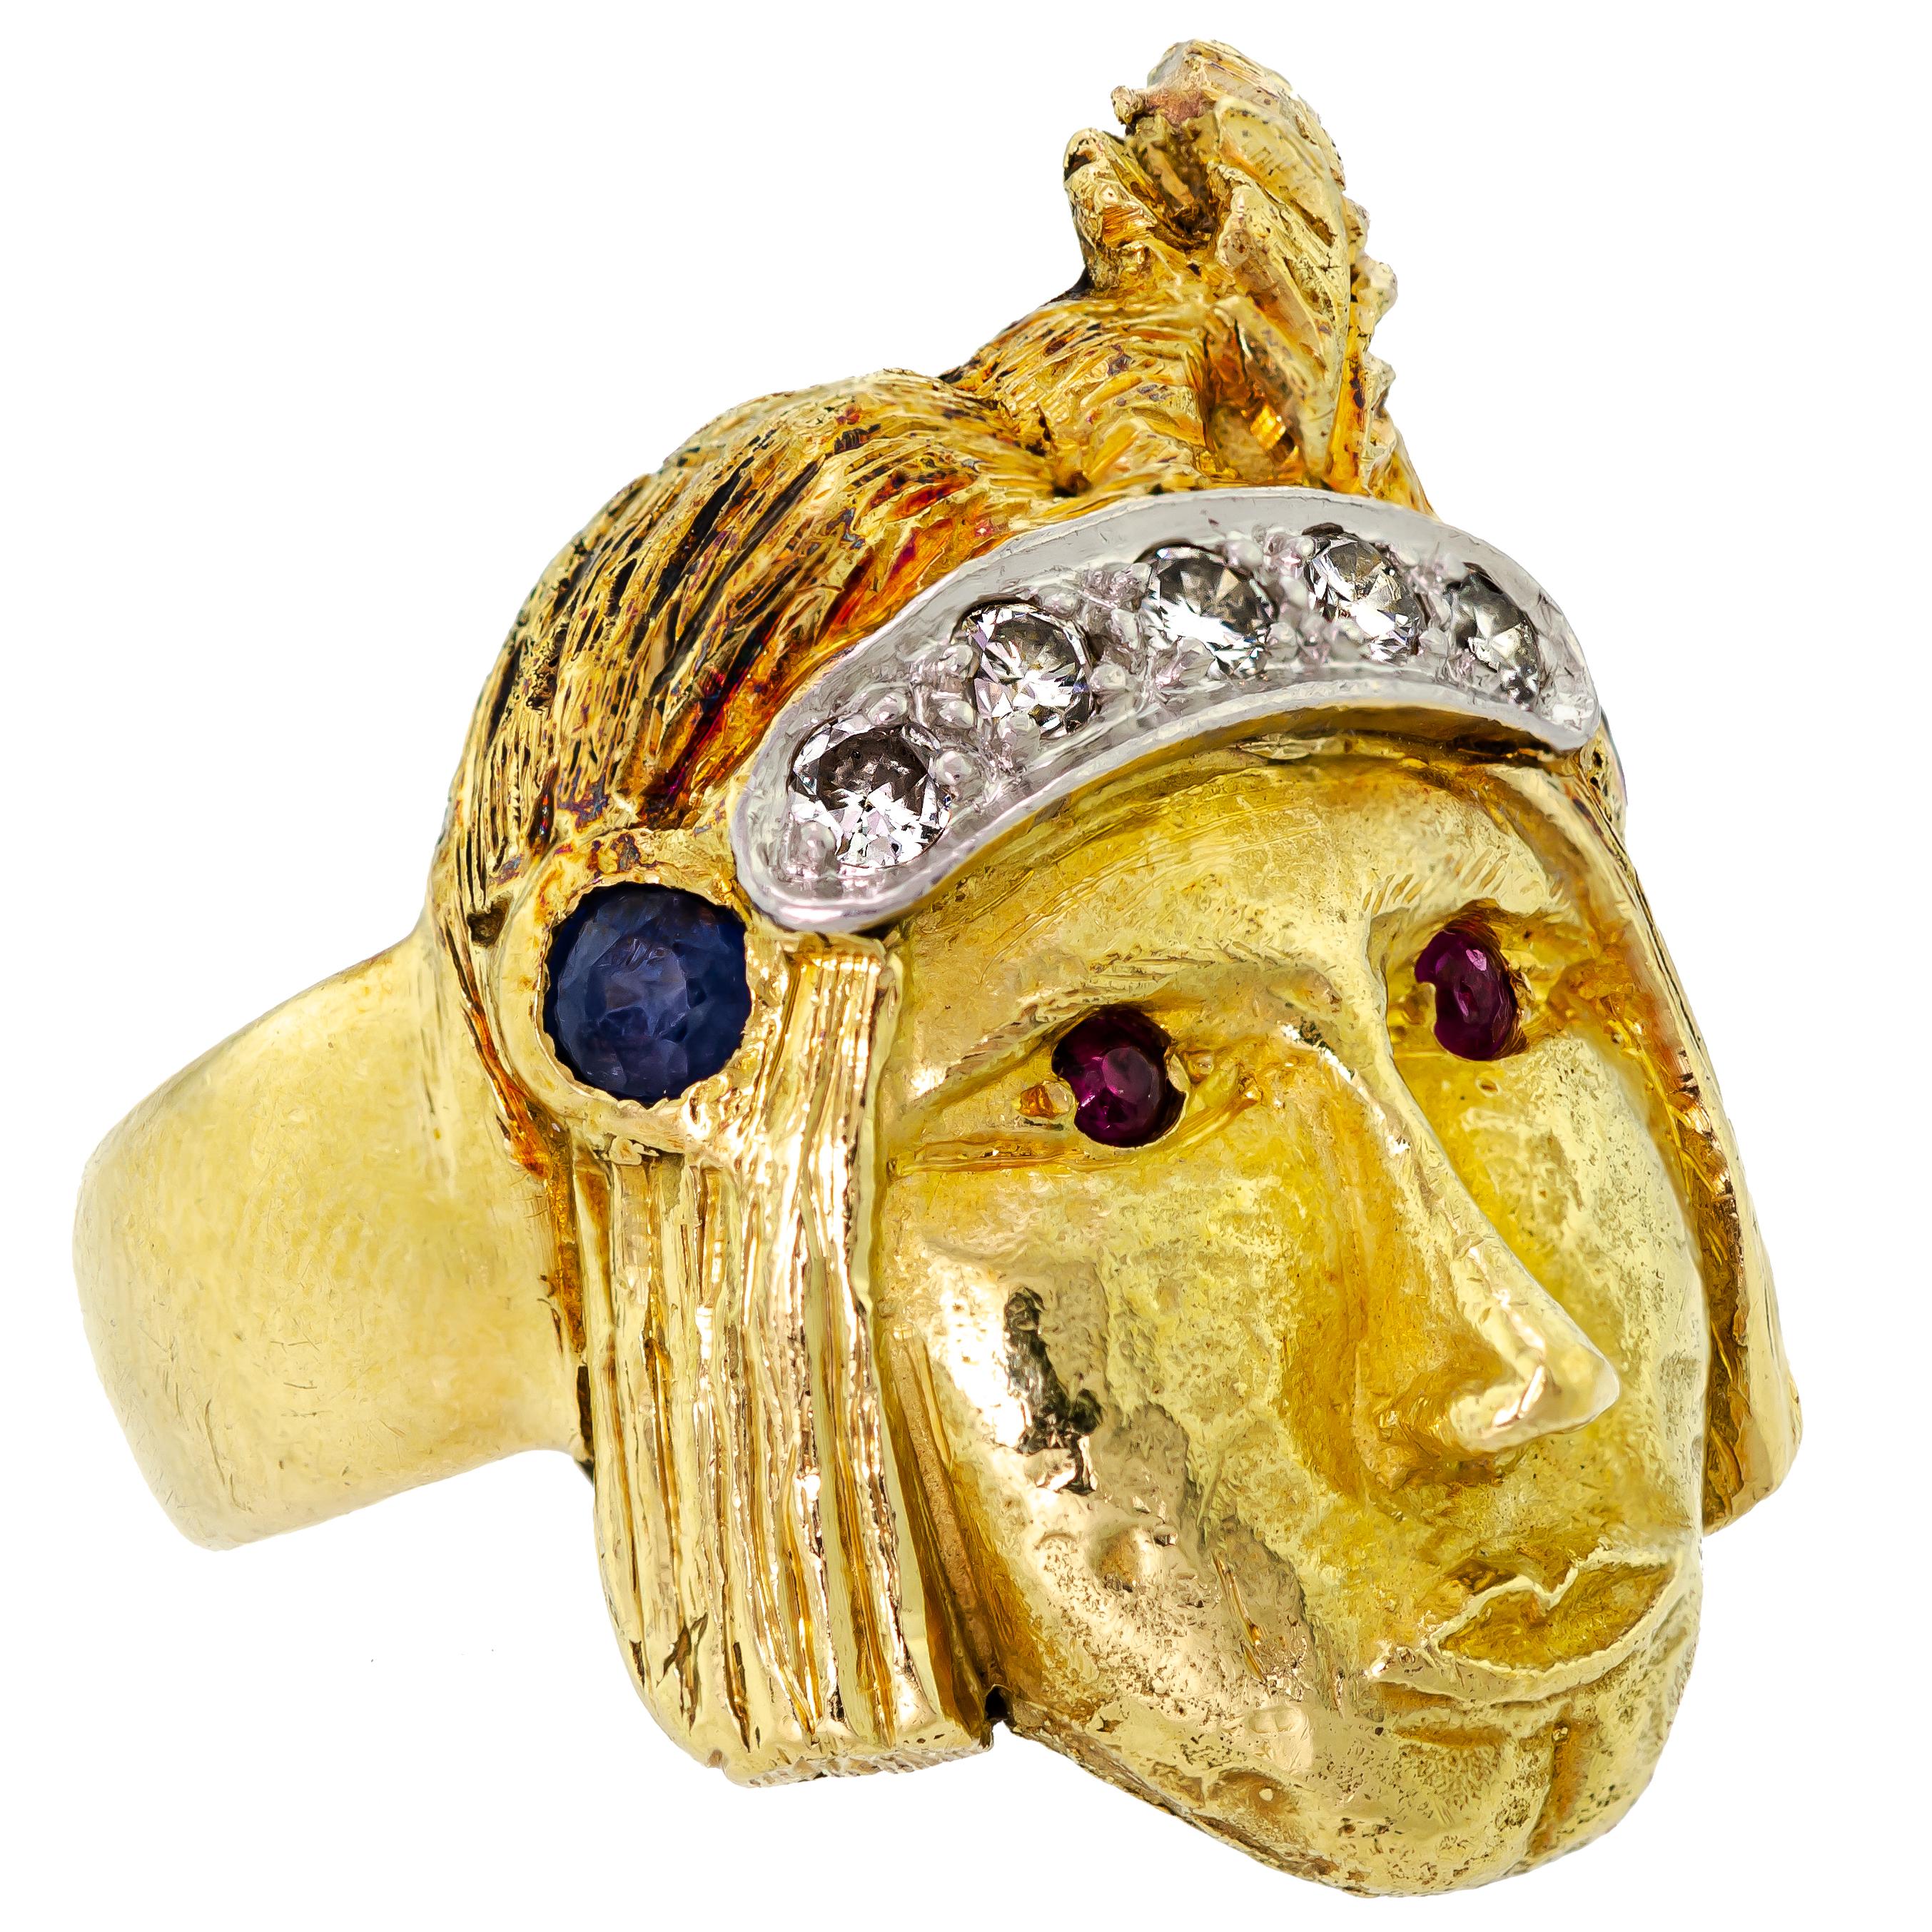 This exquisite Art Nouveau ring, hailing from the early 1900s, is a true embodiment of vintage jewelry's splendor. The ring spotlights a beautifully carved Native American head, intricately crafted in 18kt yellow gold. Dazzling diamonds, rich